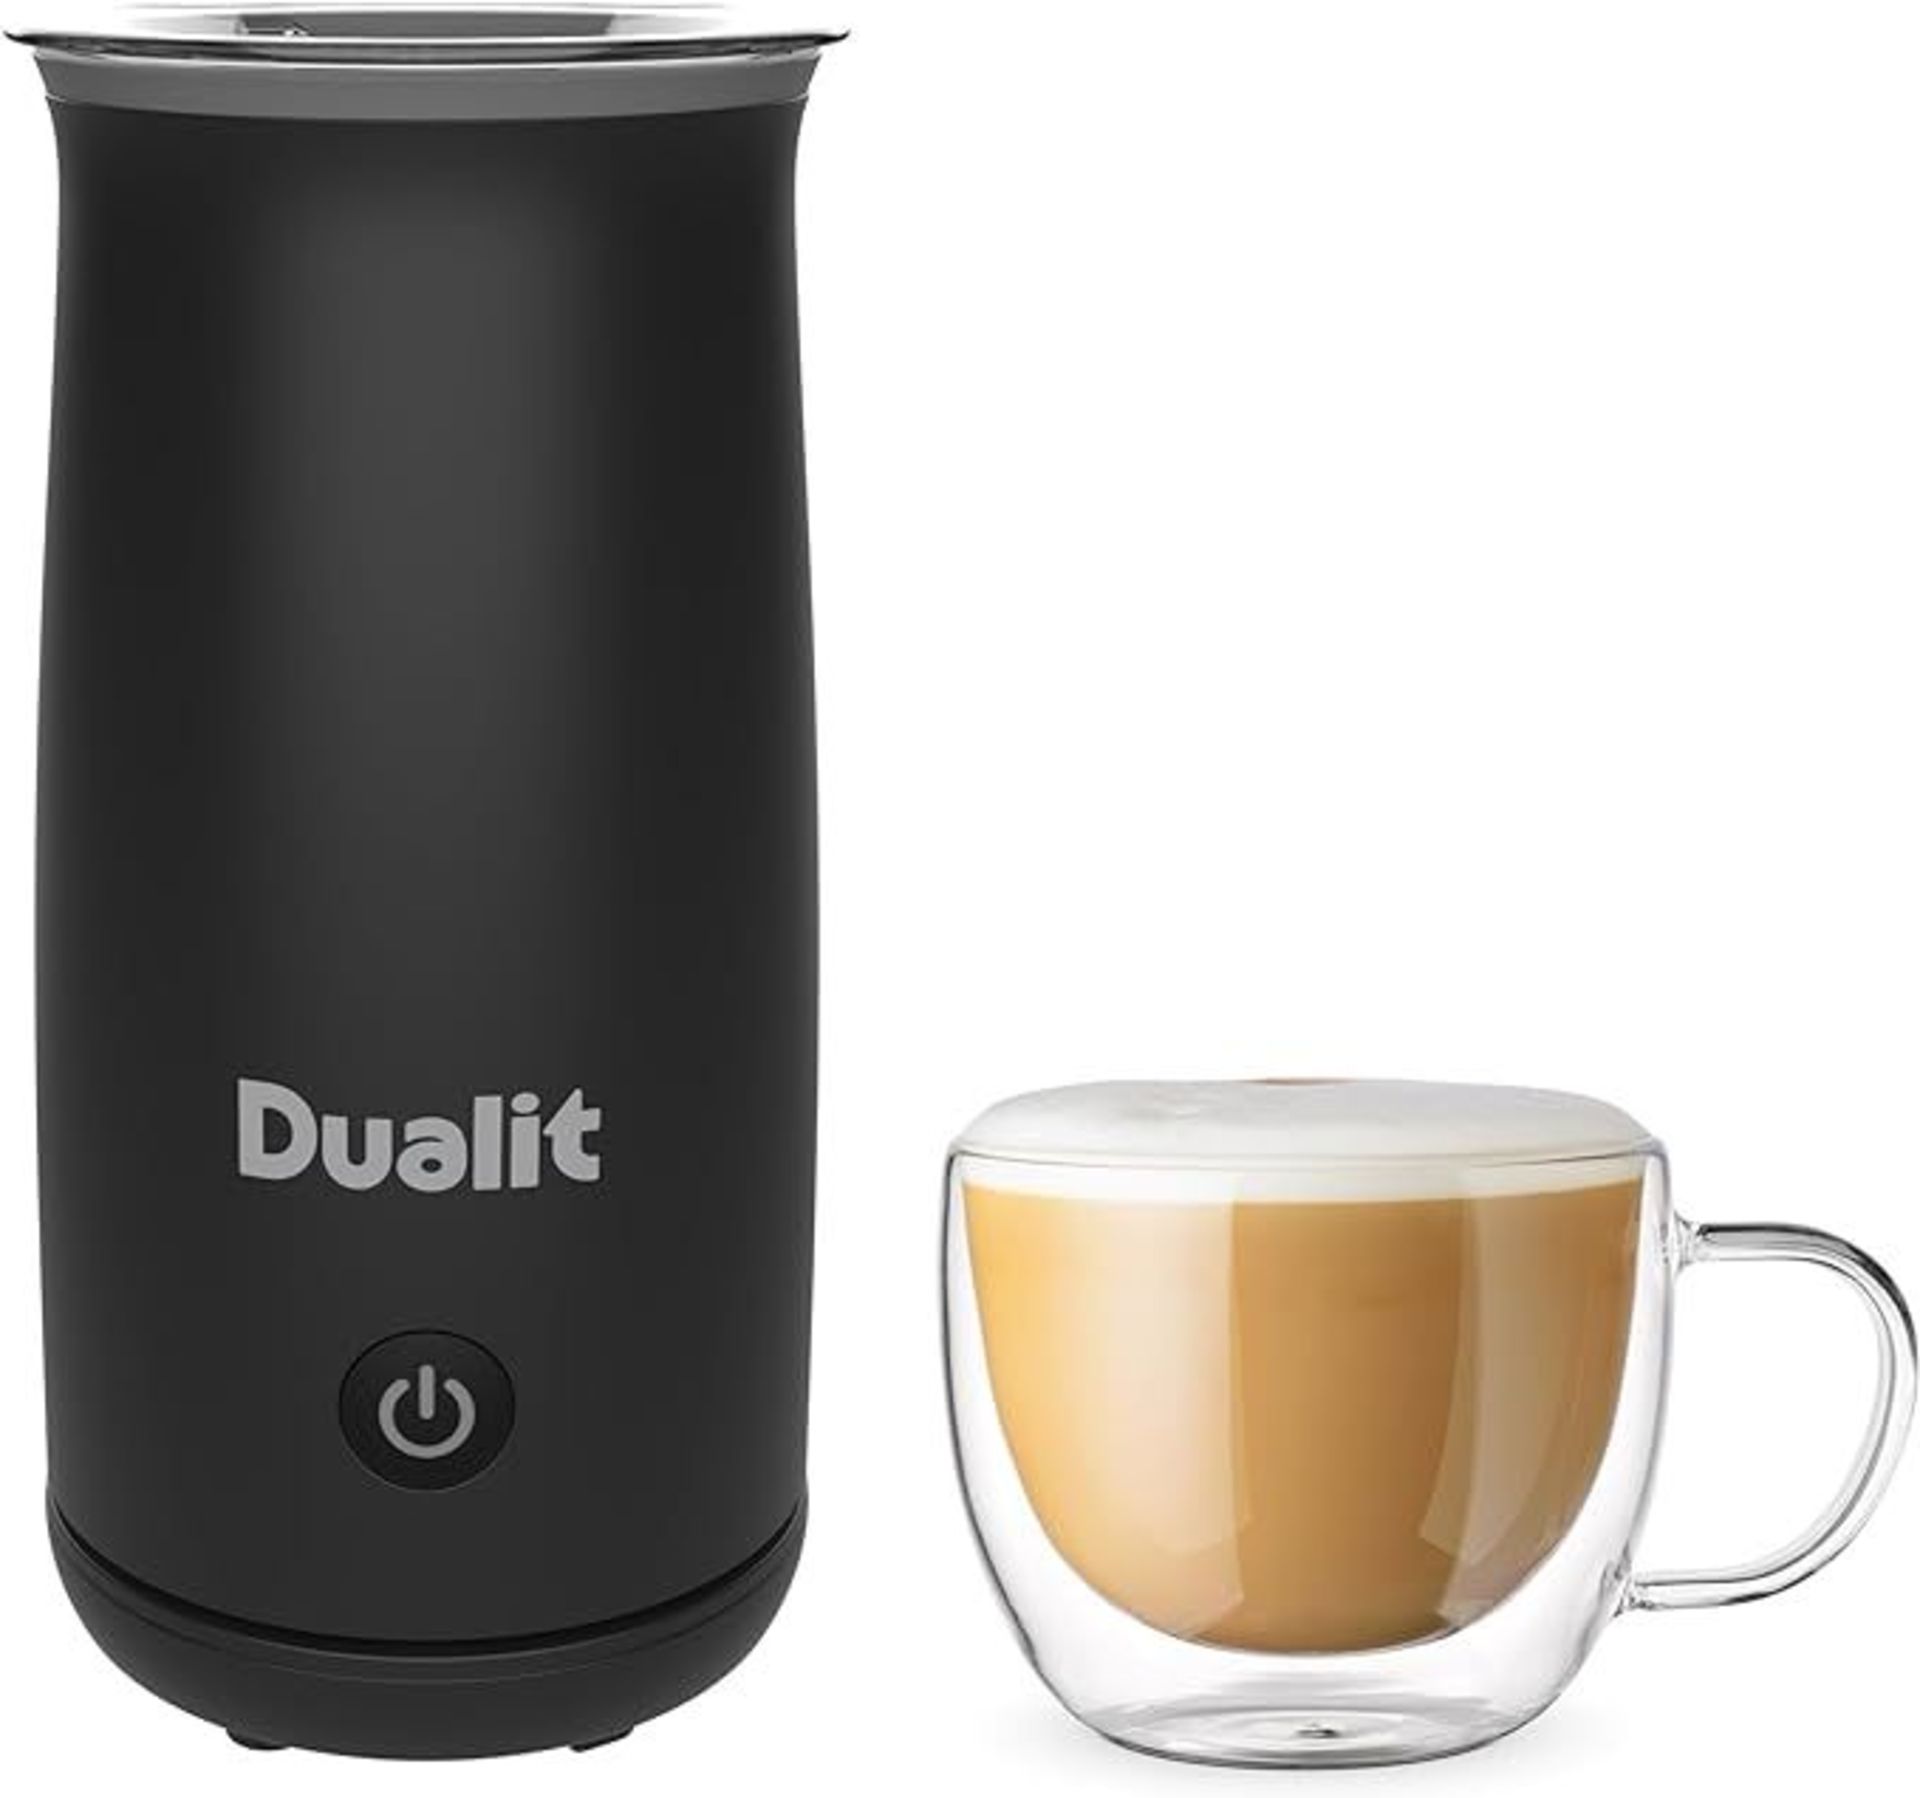 Dualit Handheld Milk Frother - 340ml Capacity - Ideal for Flat Whites, hot Chocolates, cappuccinos